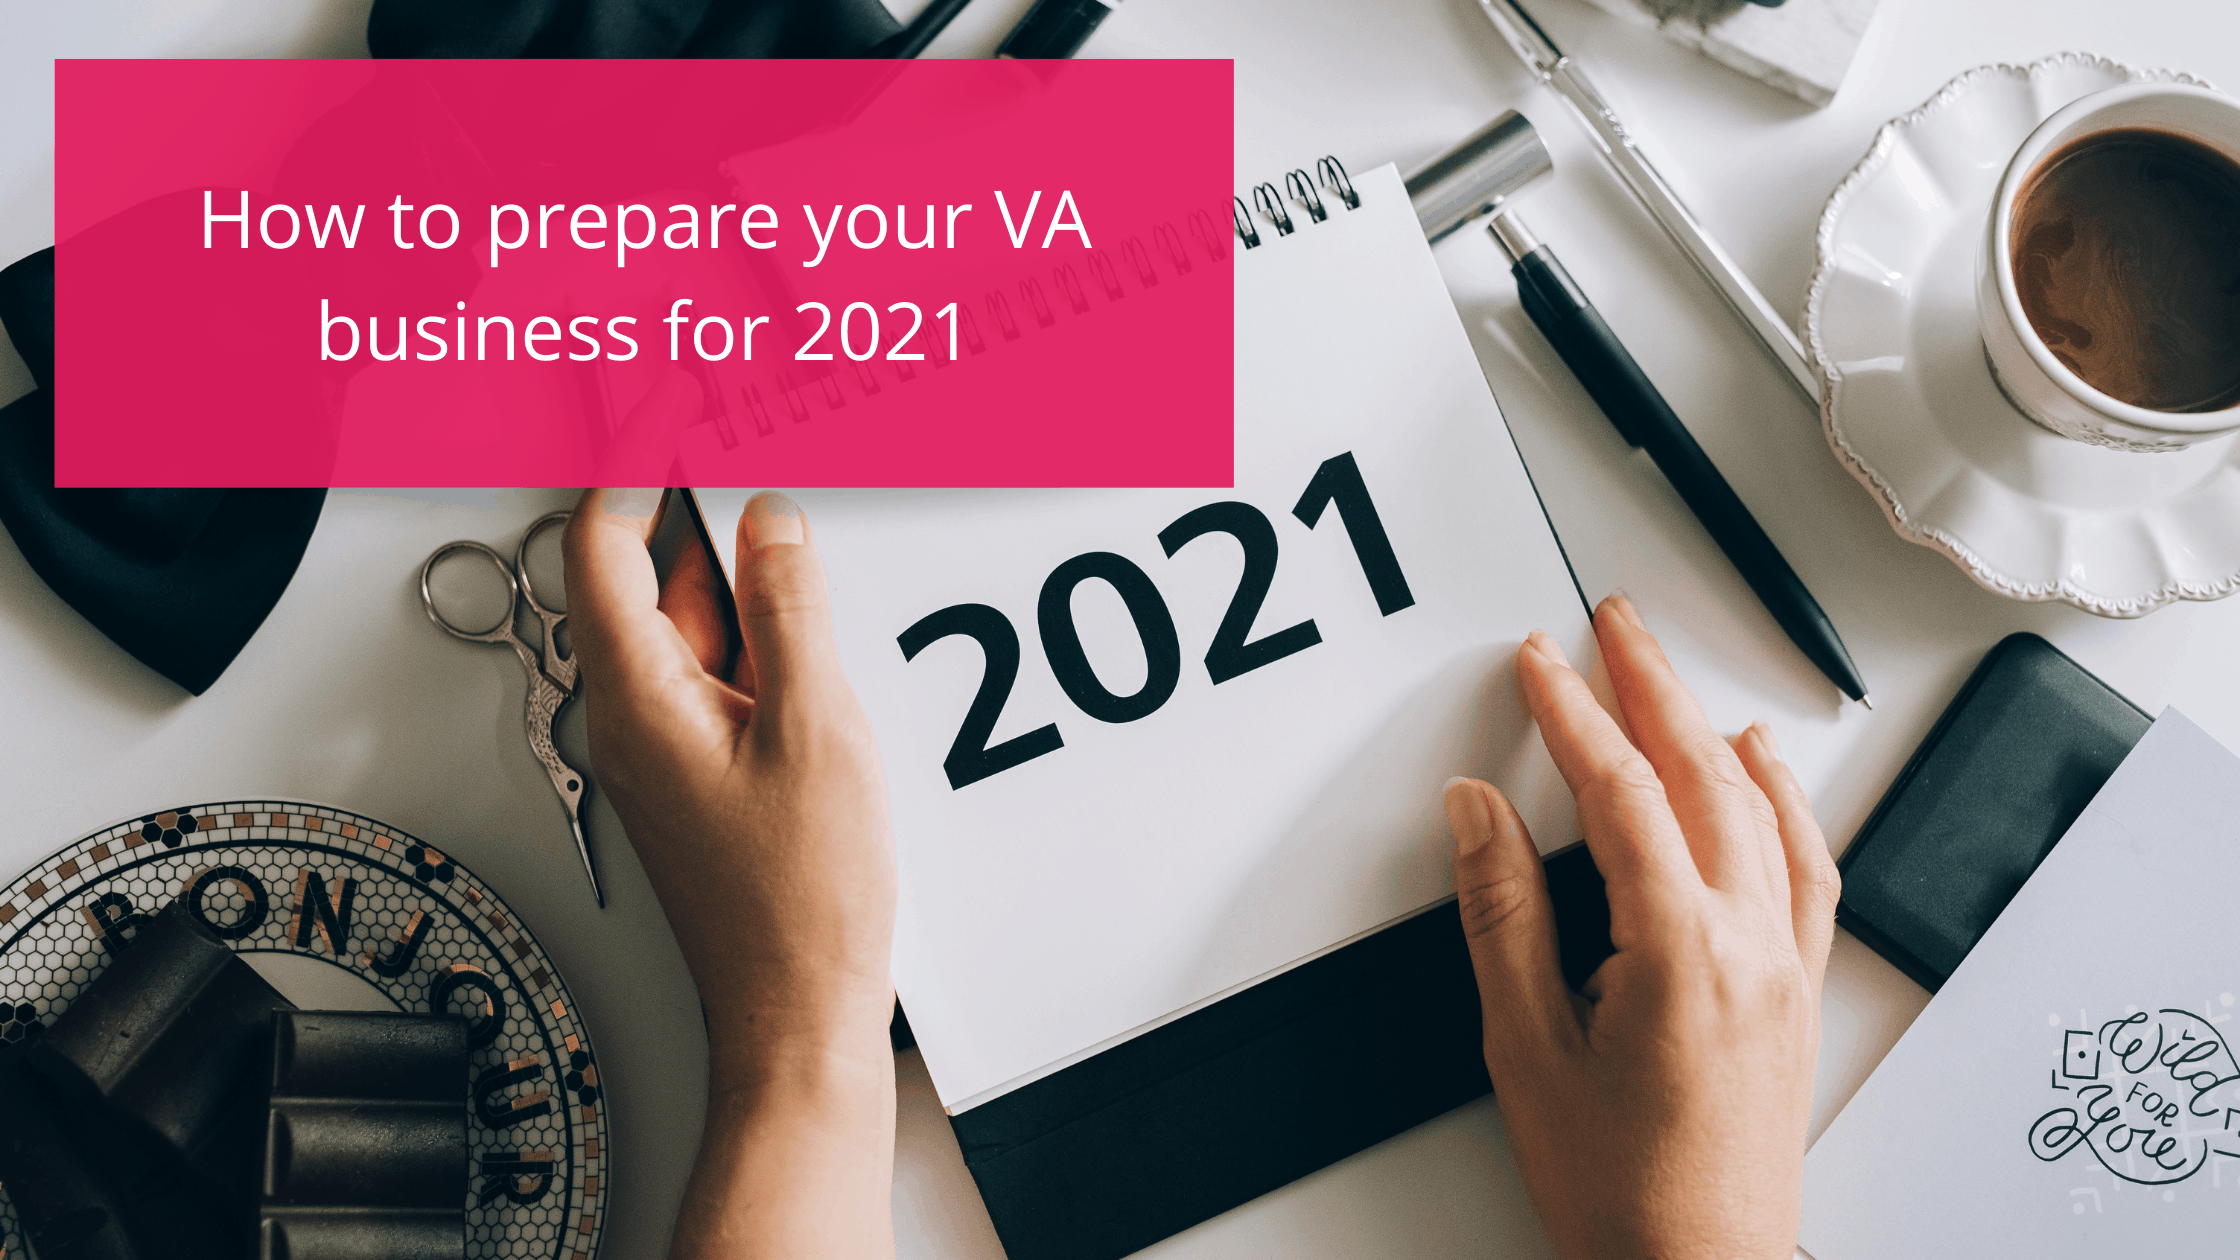 do you need VA training in 2021 - free planning advice from VACT